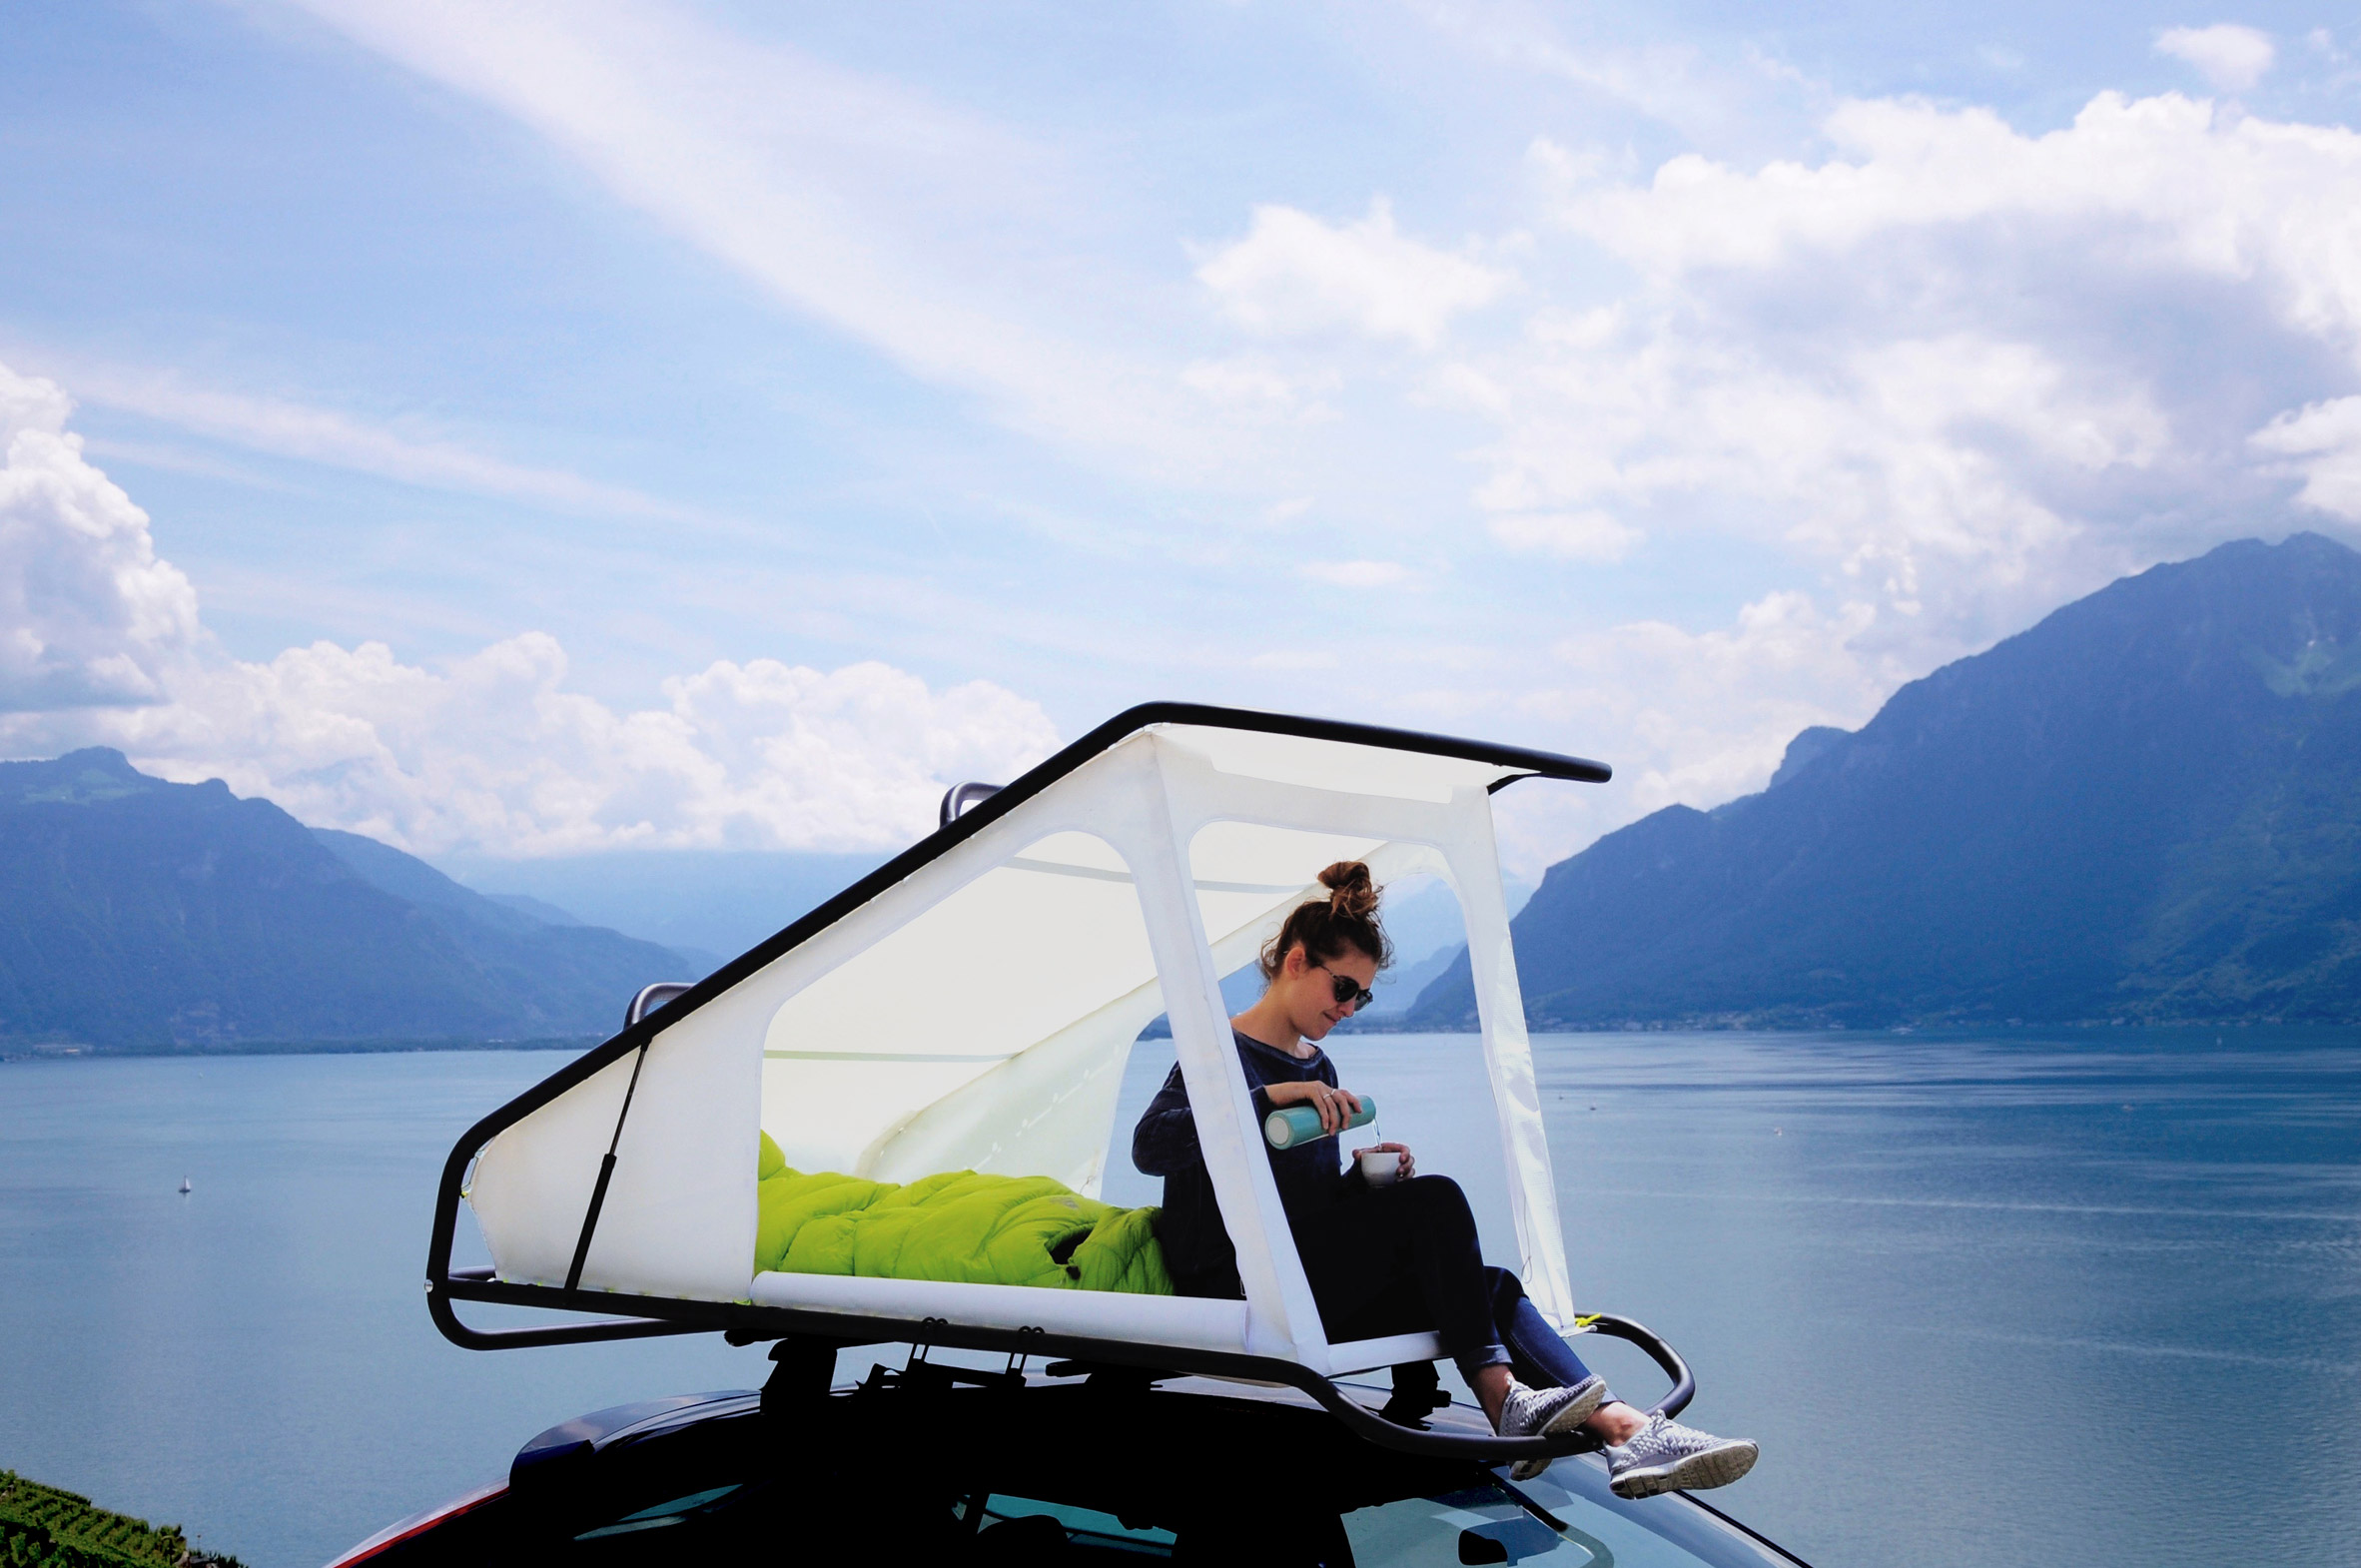 Sebastian Maluska's pop-up tent can fit on the roof of any car